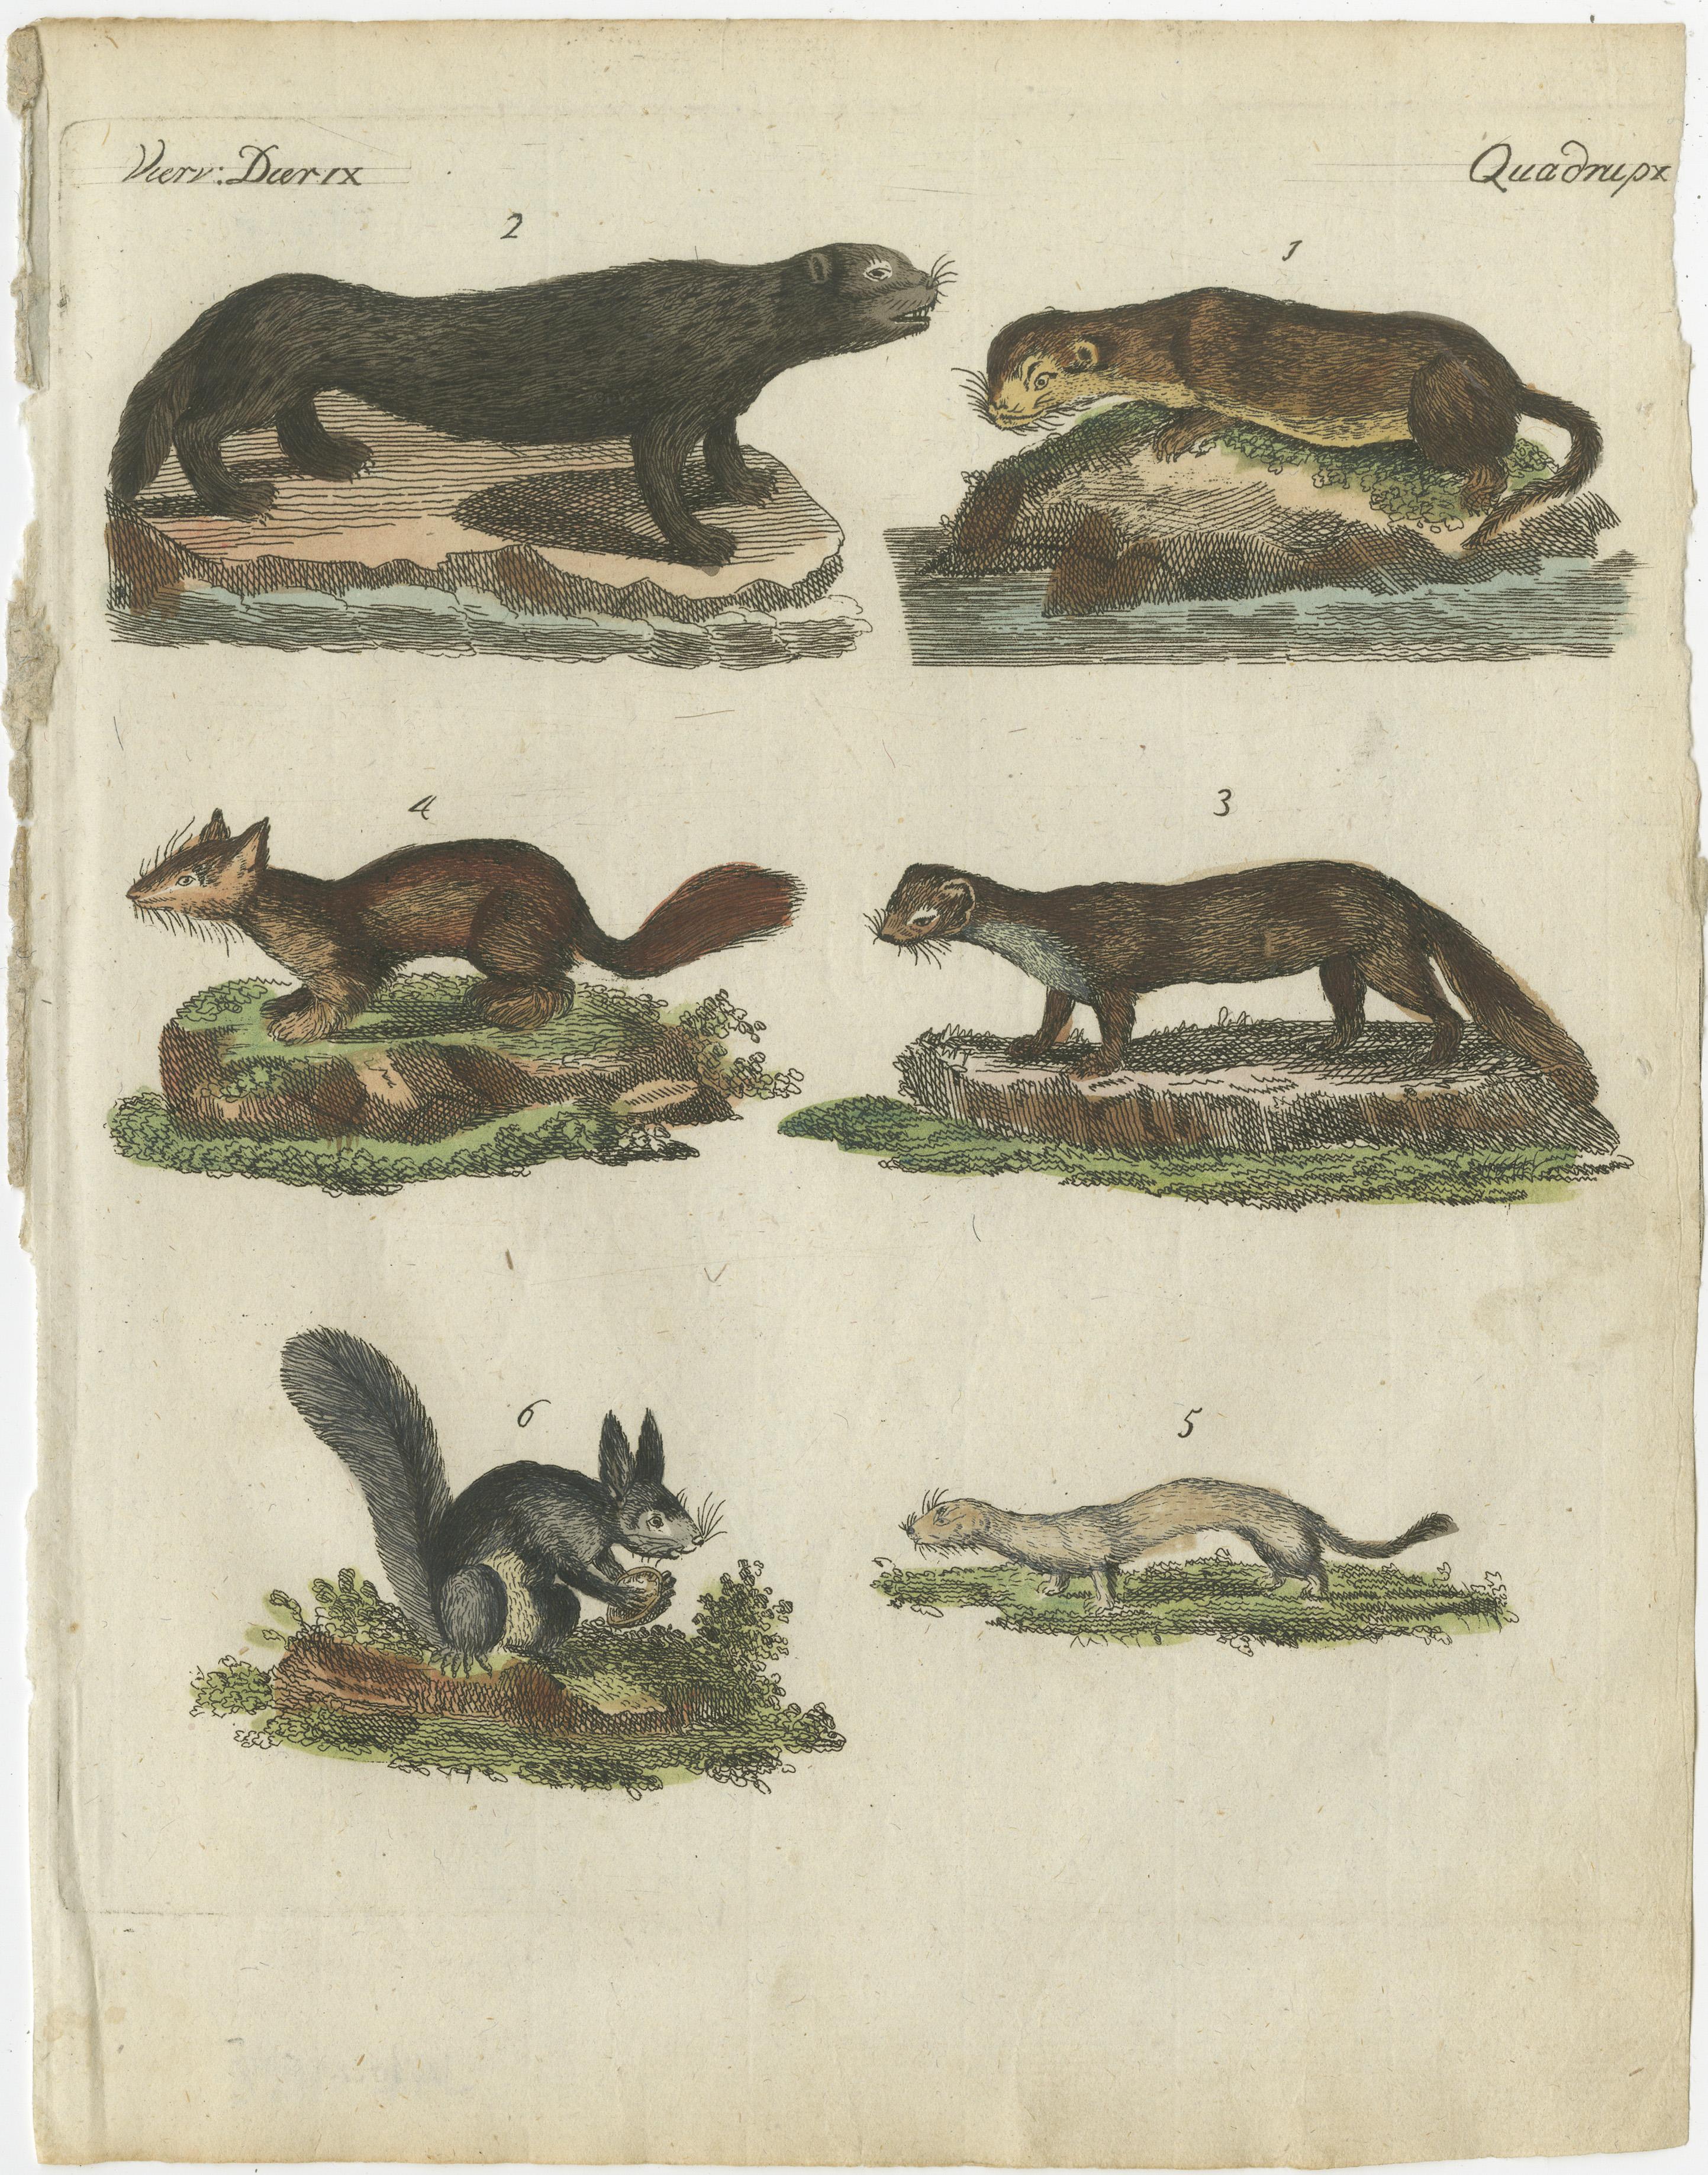 Original antique print of otters, martens, an ermine and a squirrel. This engraved print originates from a very rare unknown Dutch work. The plates are similar to the plates in the famous German work: ‘Bilderbuch fur Kinder' by F.J. Bertuch,